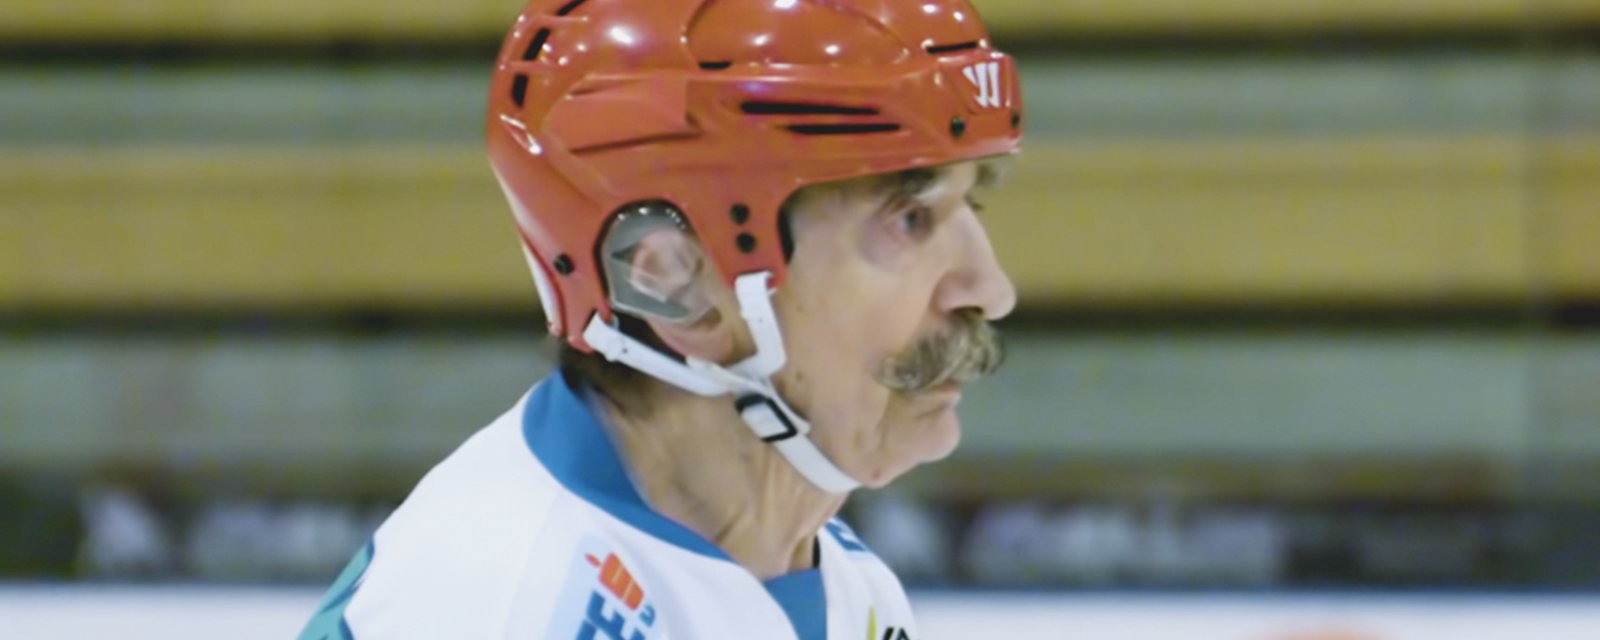 95-year-old hockey player is unbelievable with the puck!​ Jagr's inspiration?